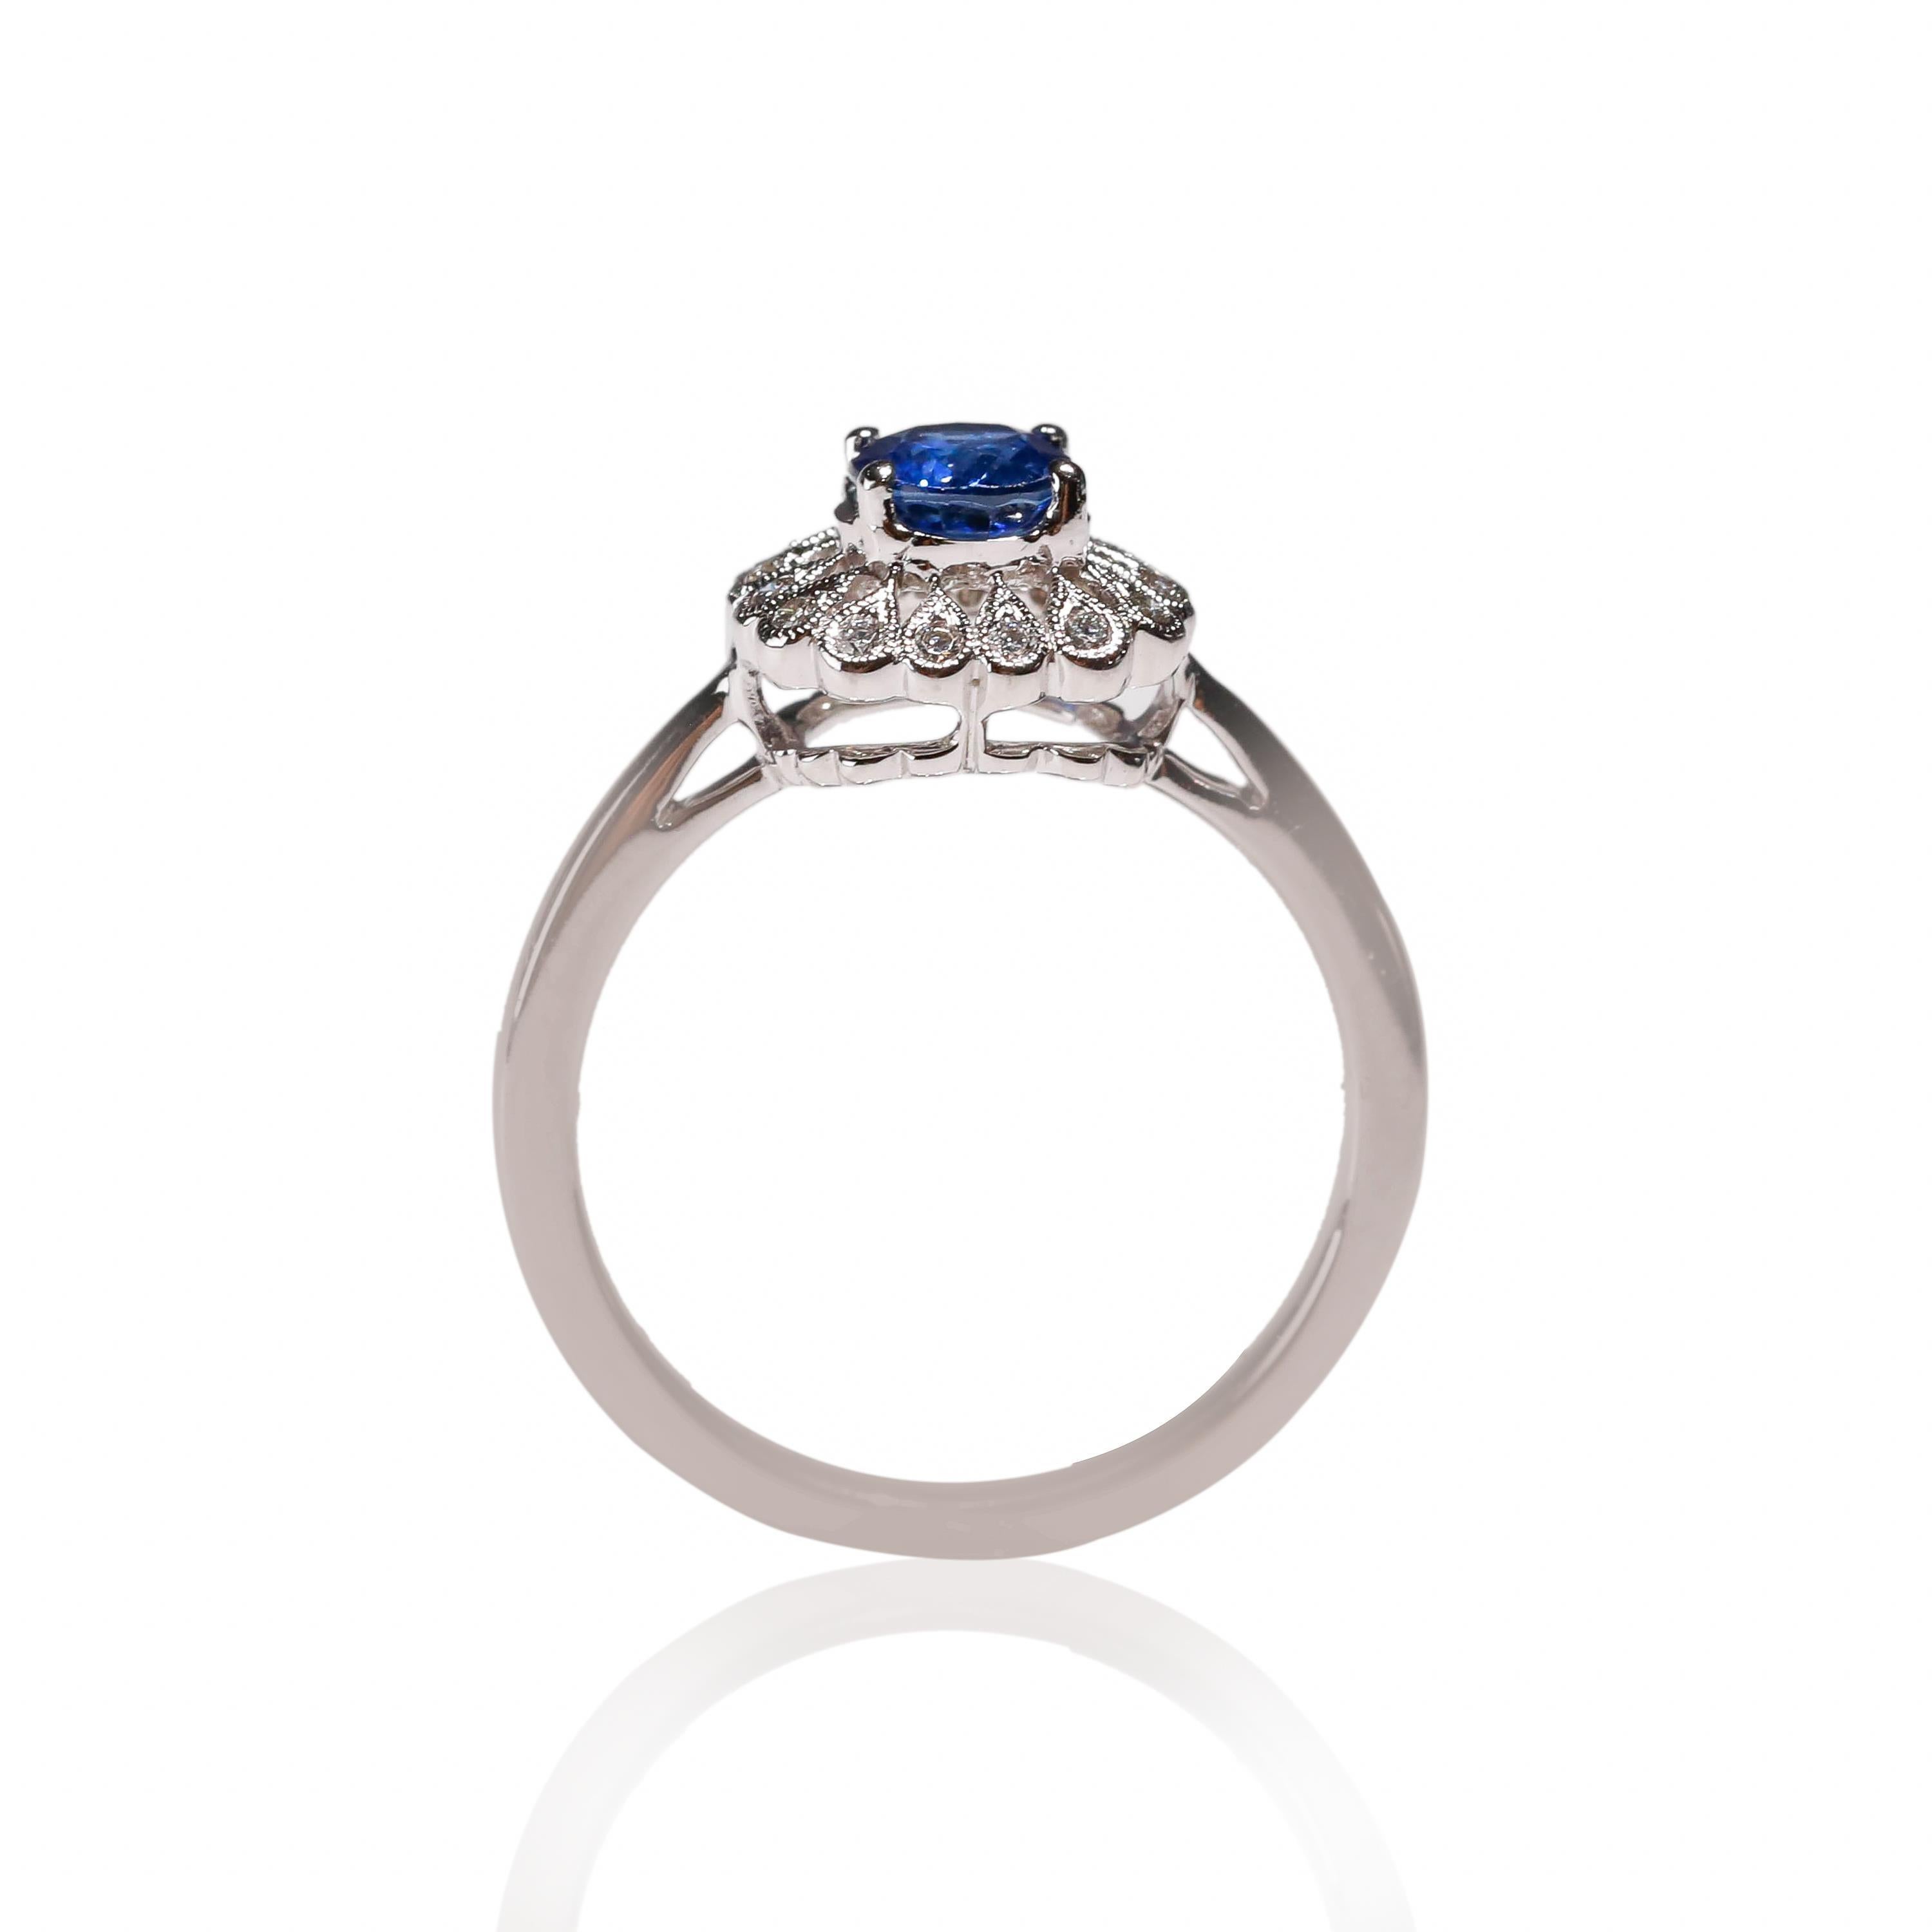 14 Karat White Gold 0.87 Carat Oval Blue Sapphire Diamond Floral Halo Ring

Crafted in 14 kt White Gold, this Unique design showcases a Blue Sapphire 0.87 TCW Oval shaped Sapphire, set in a halo of round-cut mesmerizing diamonds, Polished to a